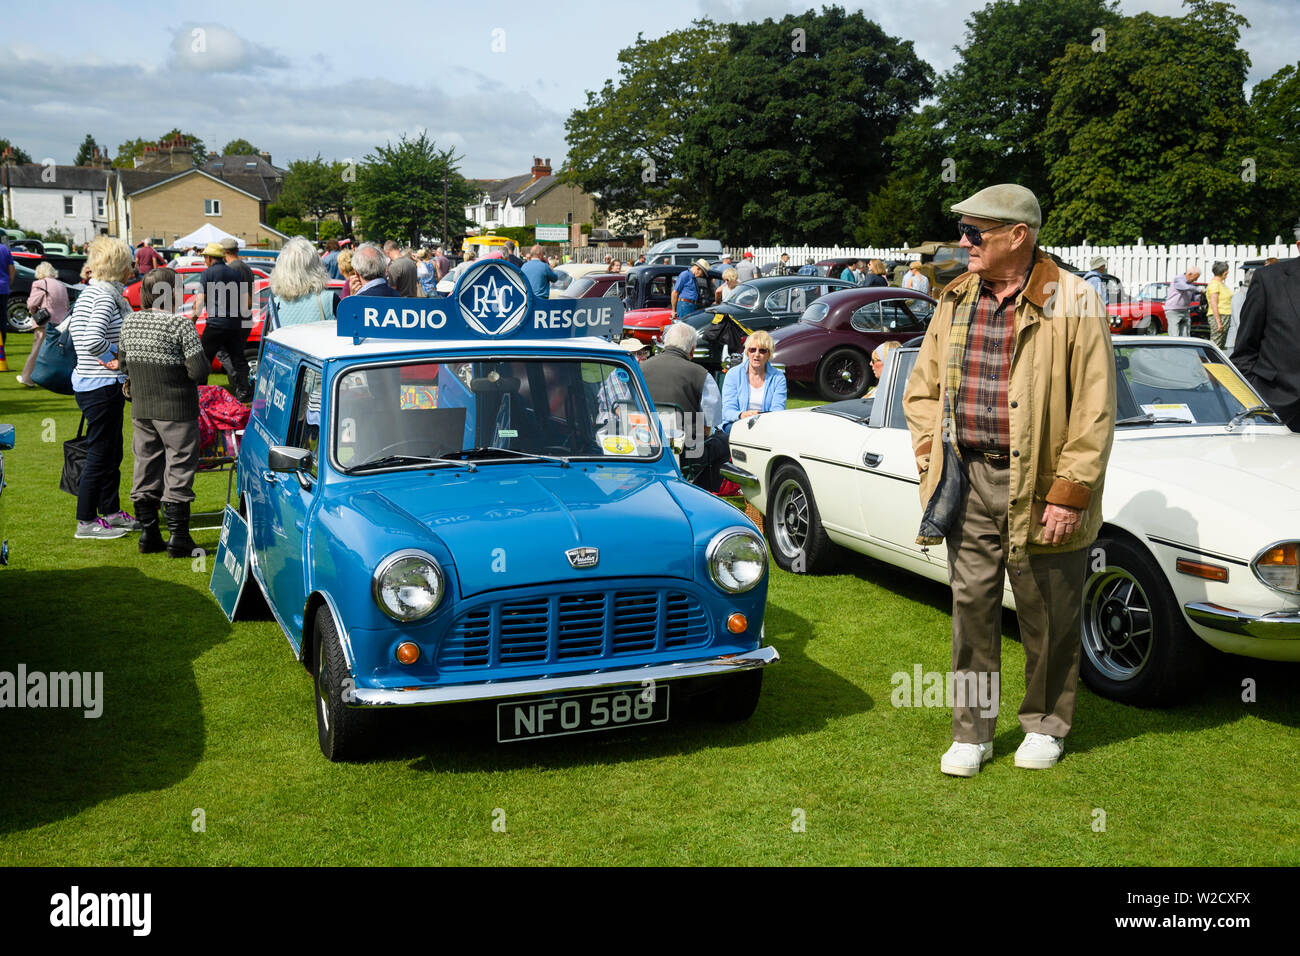 1961 commercial motorcar (Austin Mini Van RAC Radio Rescue) on display & people visiting Classic Vehicle Show - Burley-In-Wharfedale, England, UK. Stock Photo